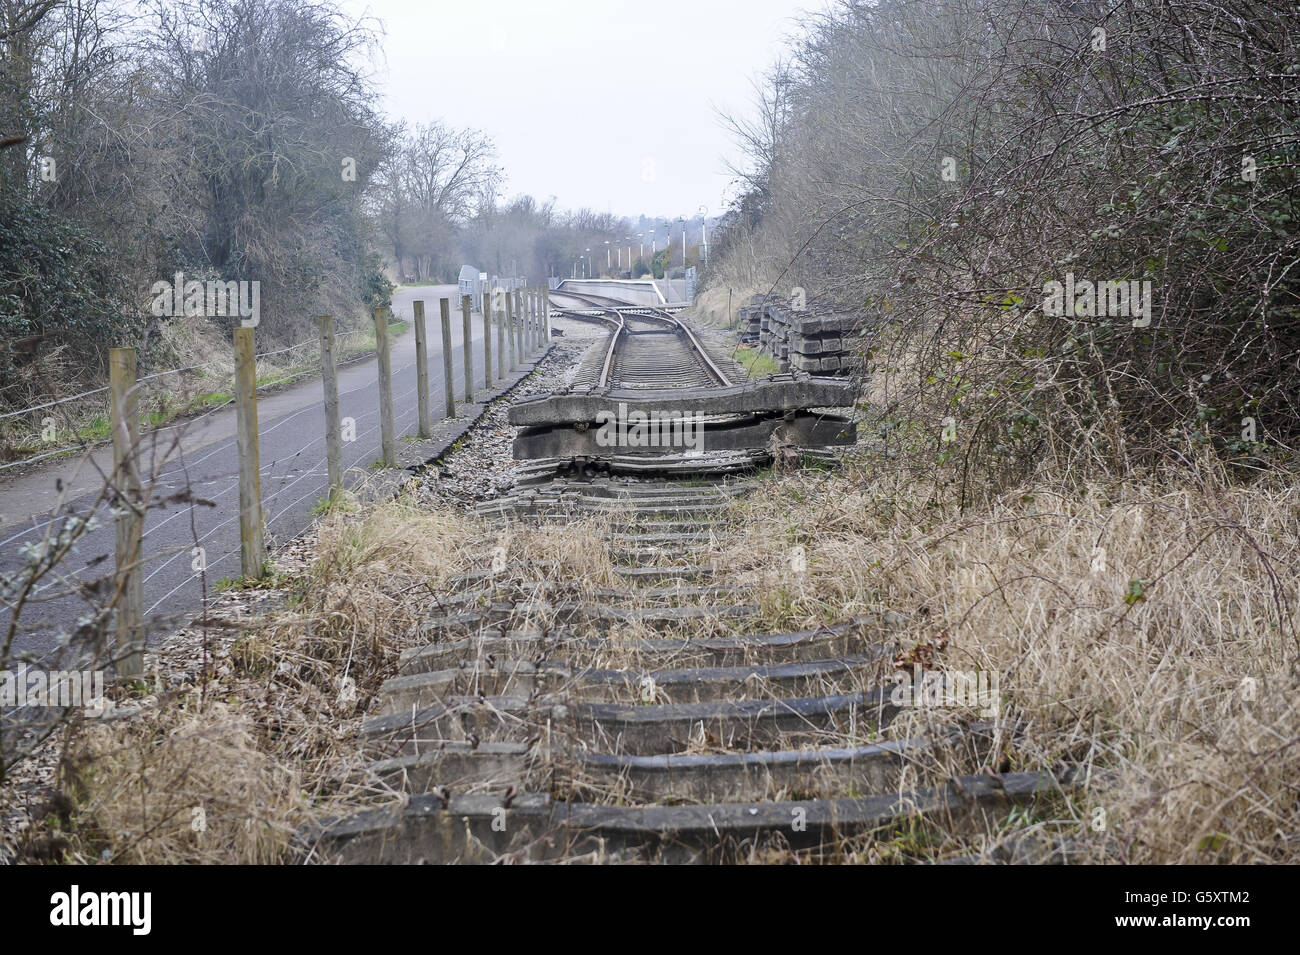 Concrete railway sleepers, without iron rails, which are on the end of the Avon Valley Railway on the Bristol & Bath railway path, pictured left of the frame. The Bristol & Bath Railway Path was constructed on the track bed of the former Midland Railway which closed for passenger traffic at the end of the 1960s. Between 1979 and 1986, the railway line was converted into the Railway Path by cycling charity Sustrans. The first stretch was between Bath and Bitton where the campaign group, Cyclebag obtained planning permission to create the 2m wide dust track. The route then developed westwards Stock Photo